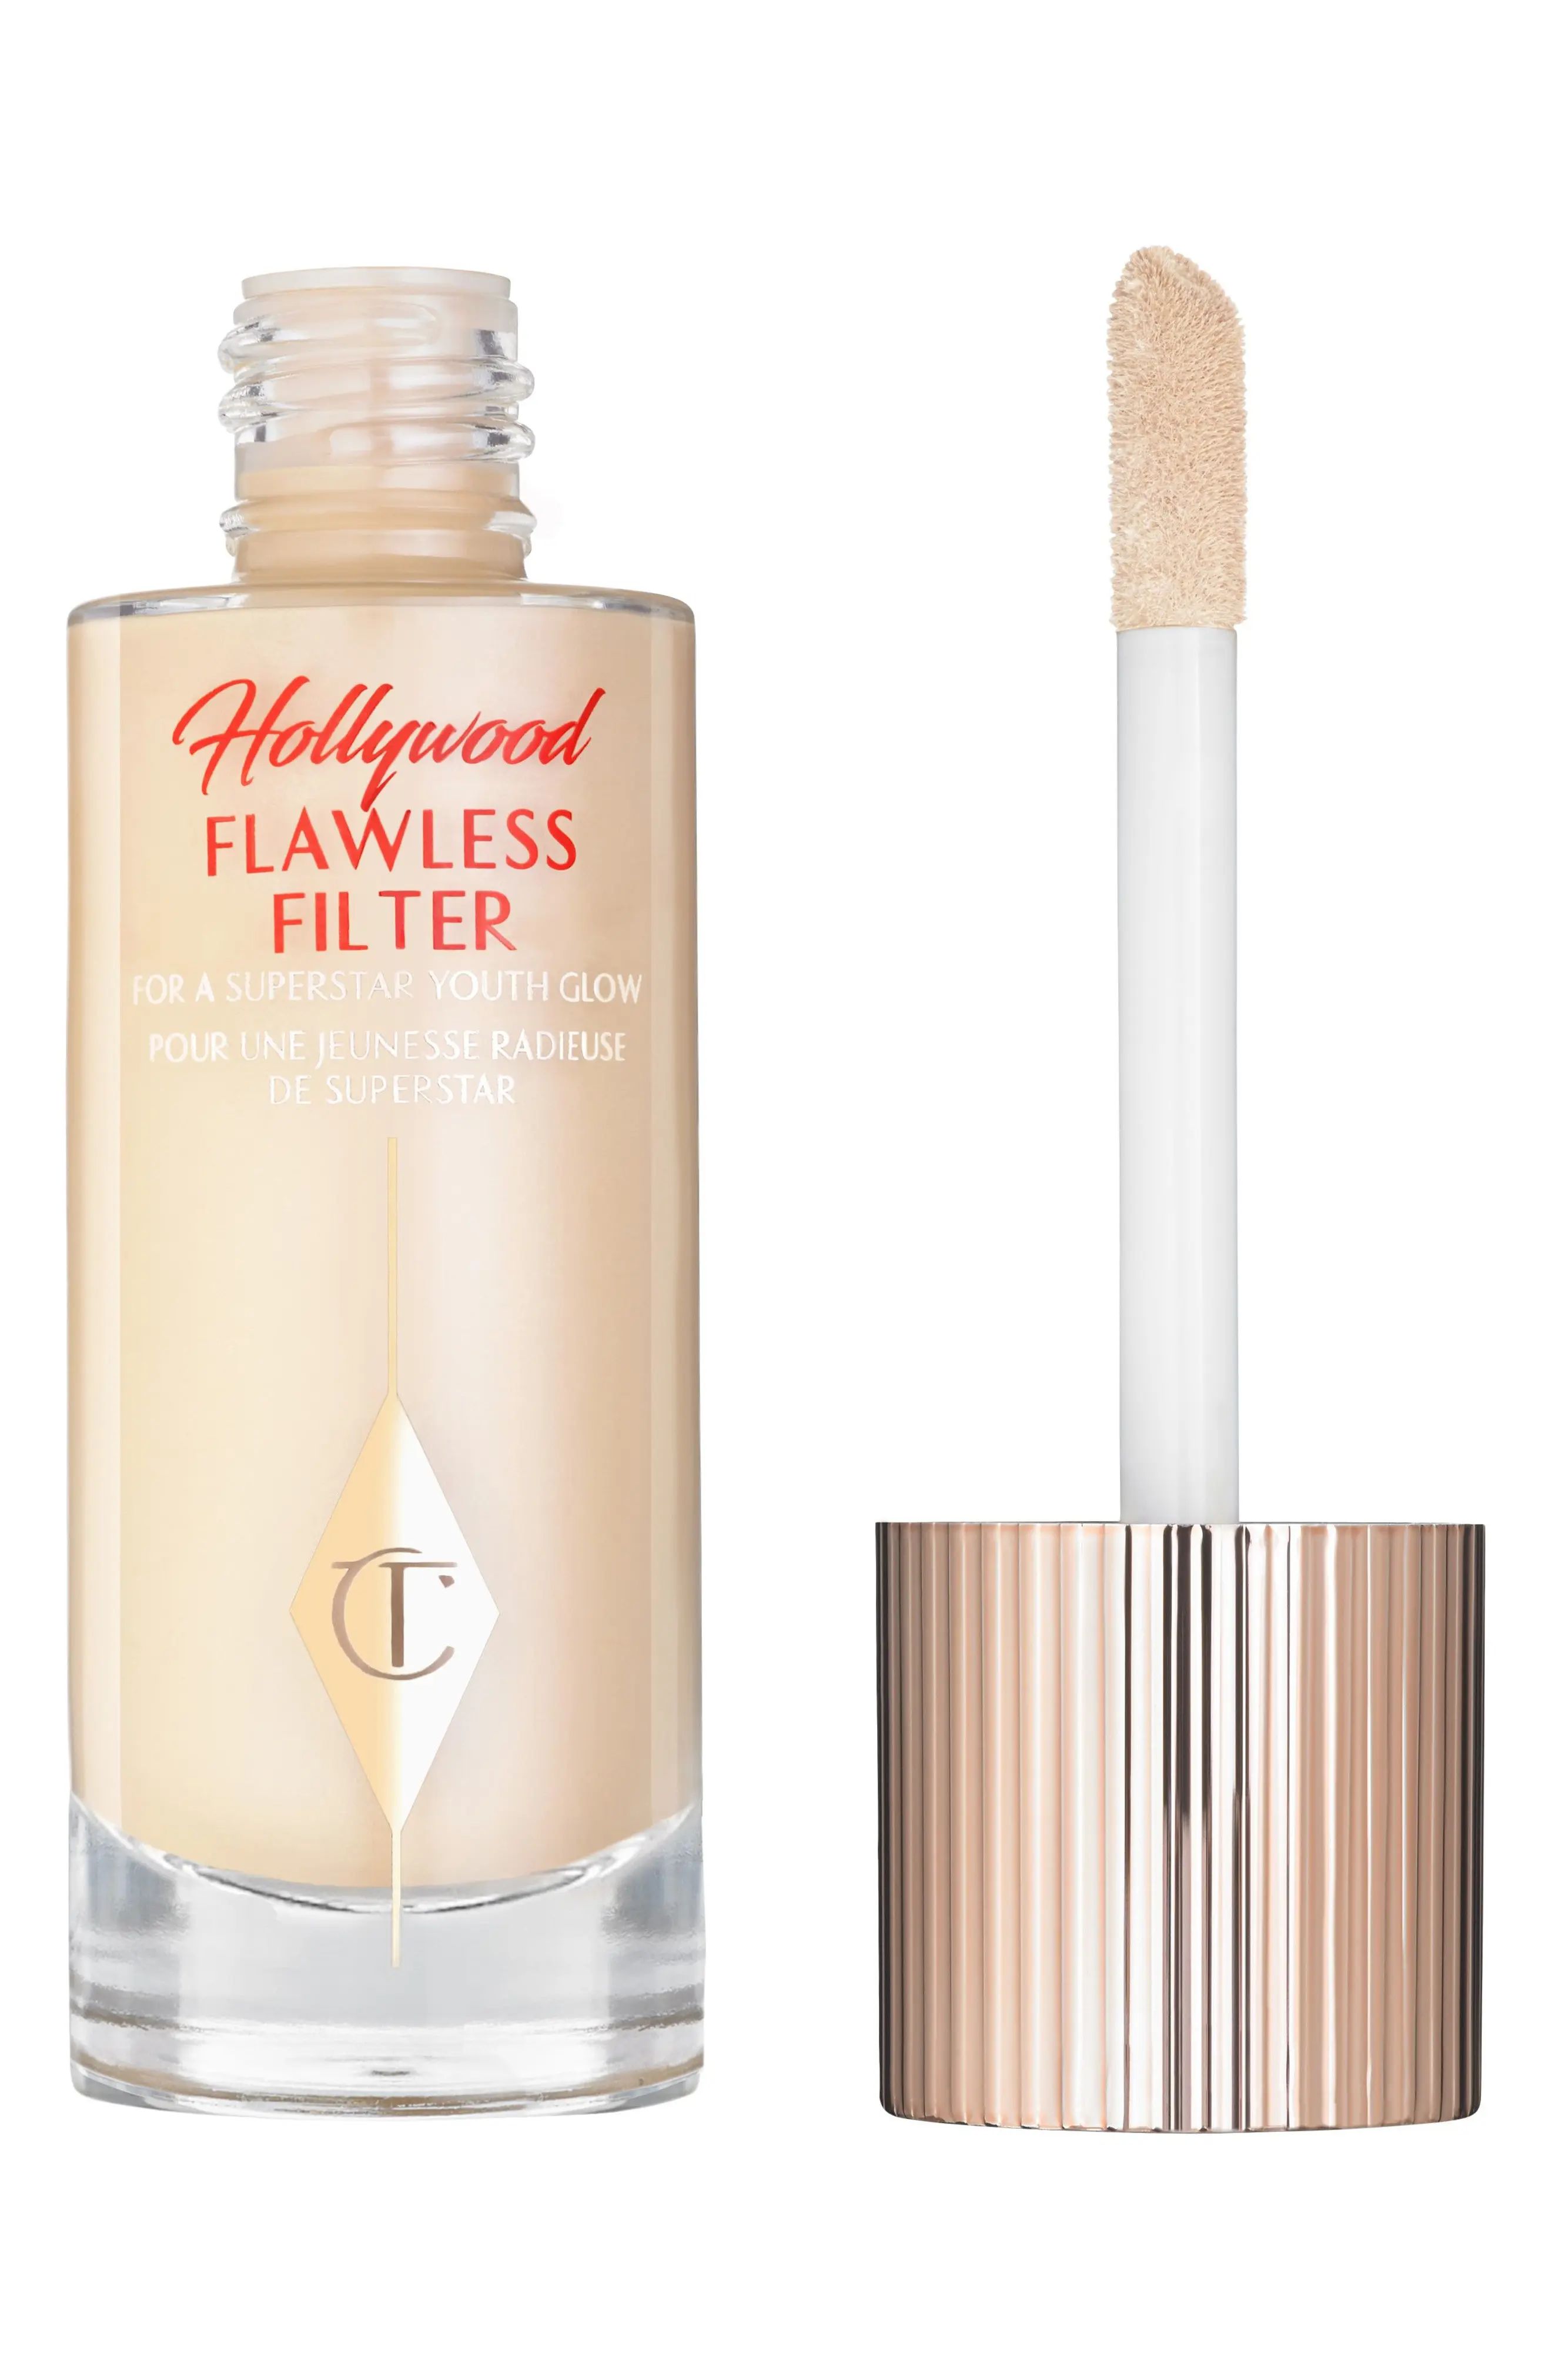 Hollywood Flawless Filter for a Superstar Youth Glow | Nordstrom